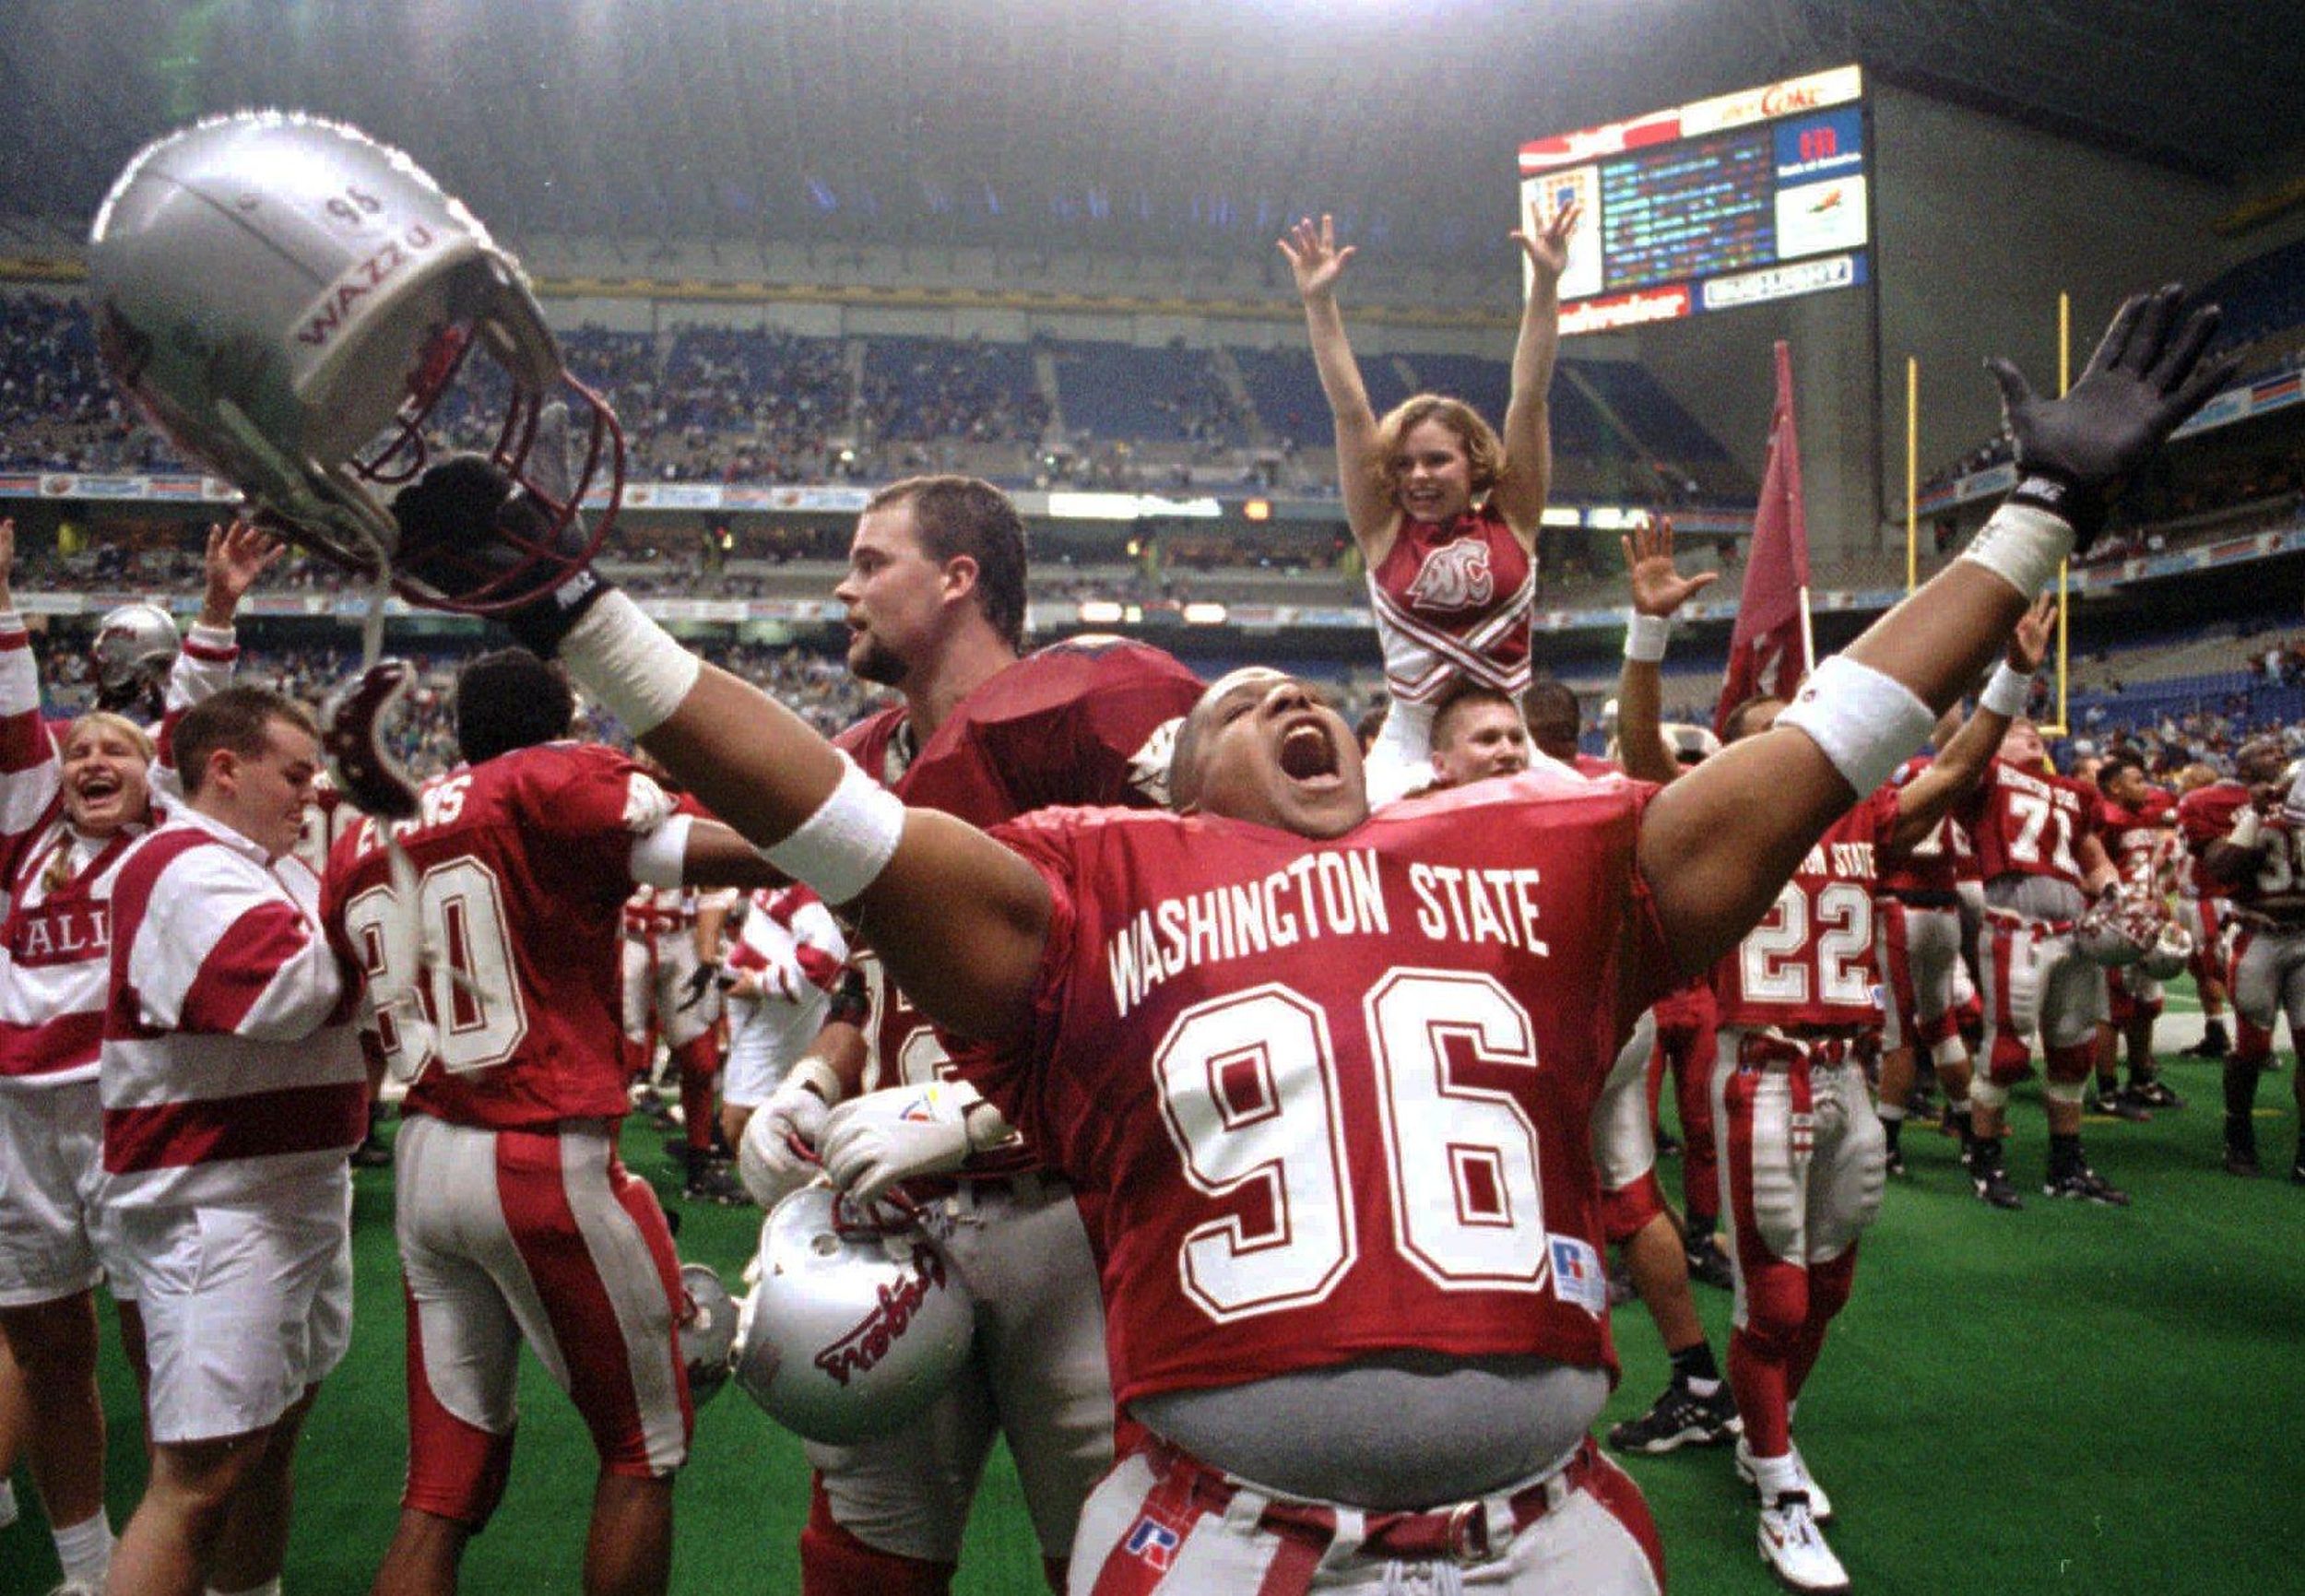 Blanchette Washington State’s bowl games, ranked from best to worst